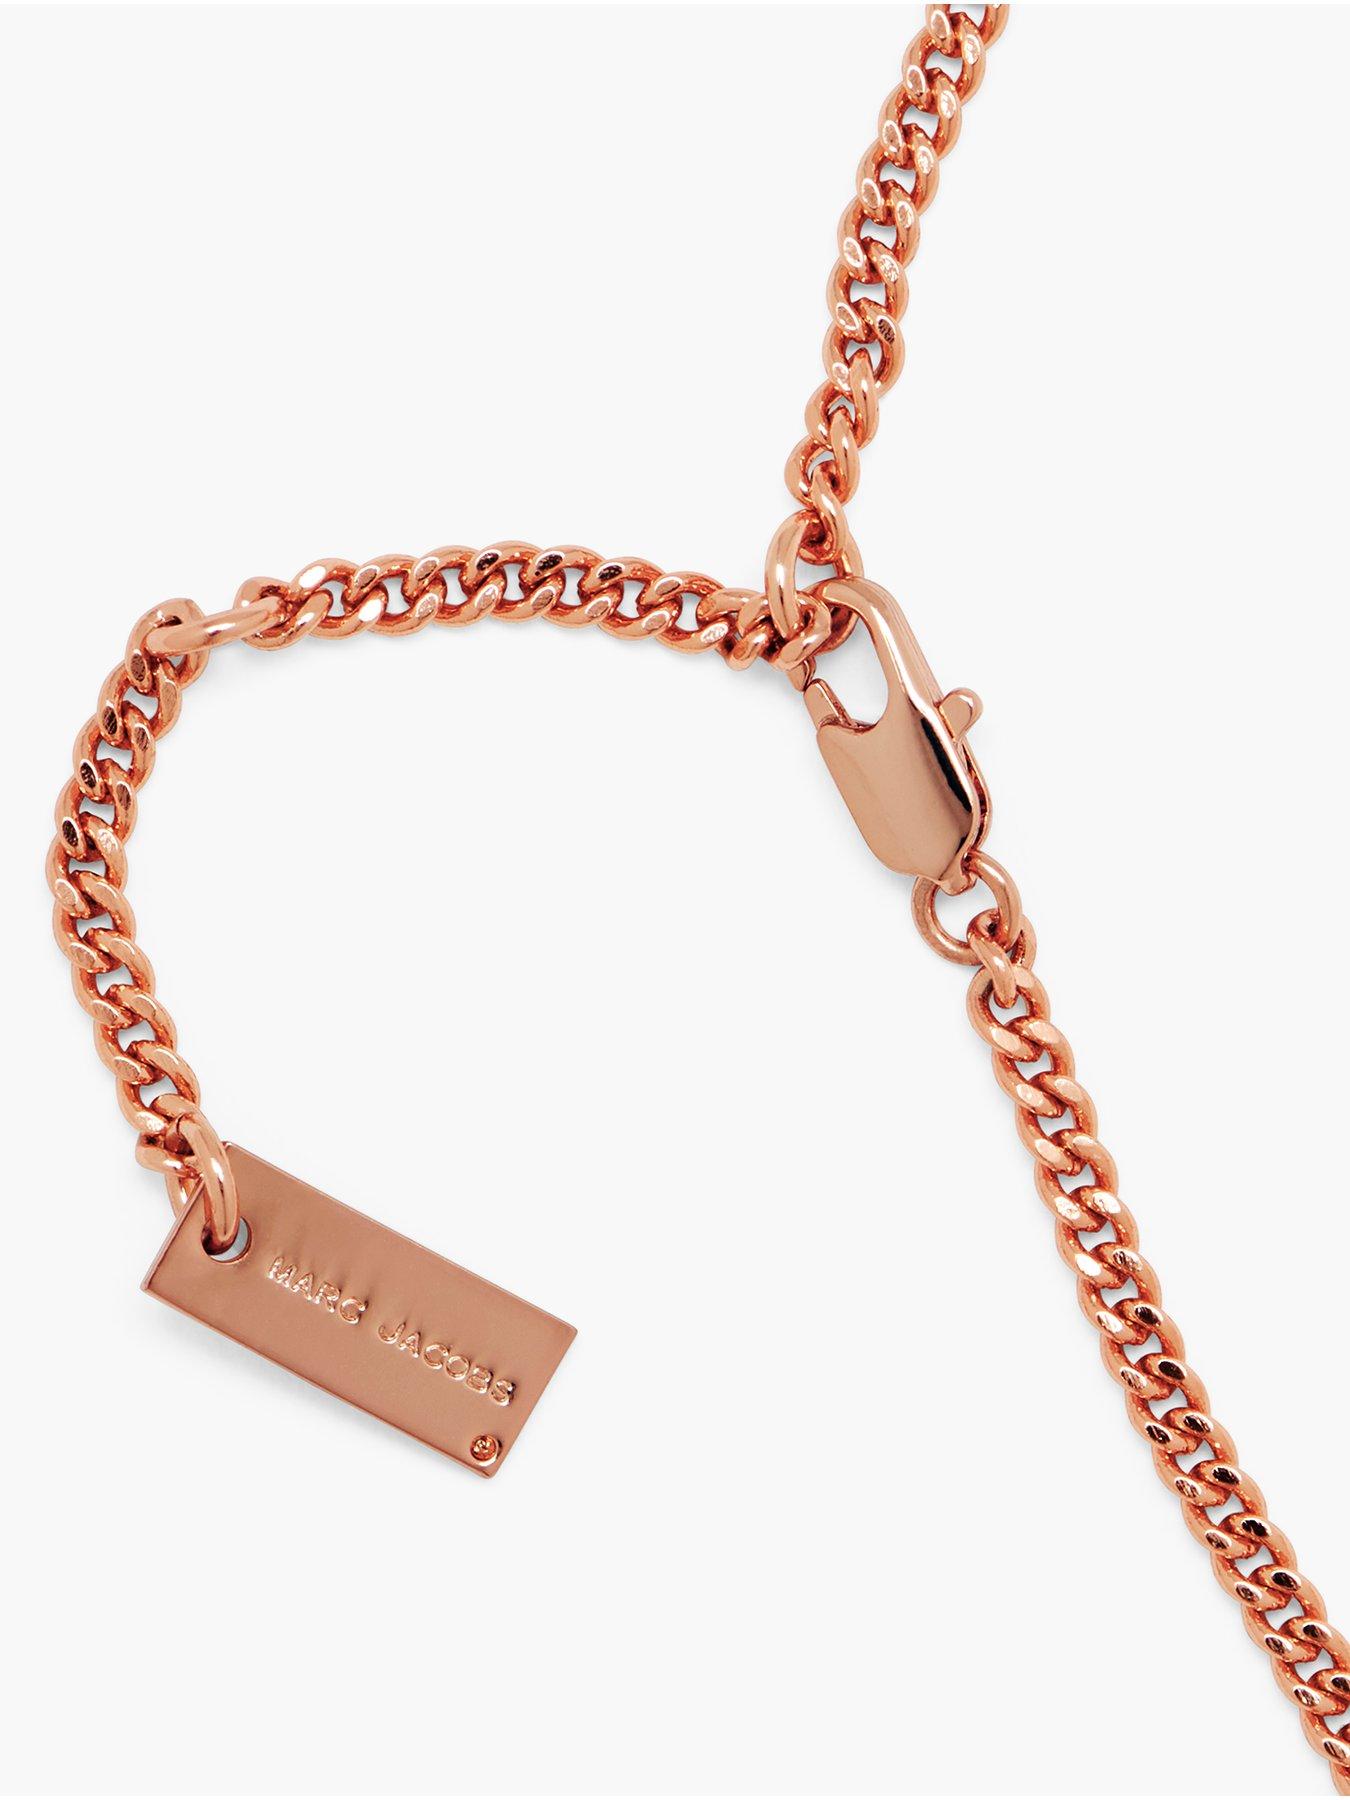 MARC JACOBS The Tote Bag Necklace | Very.co.uk